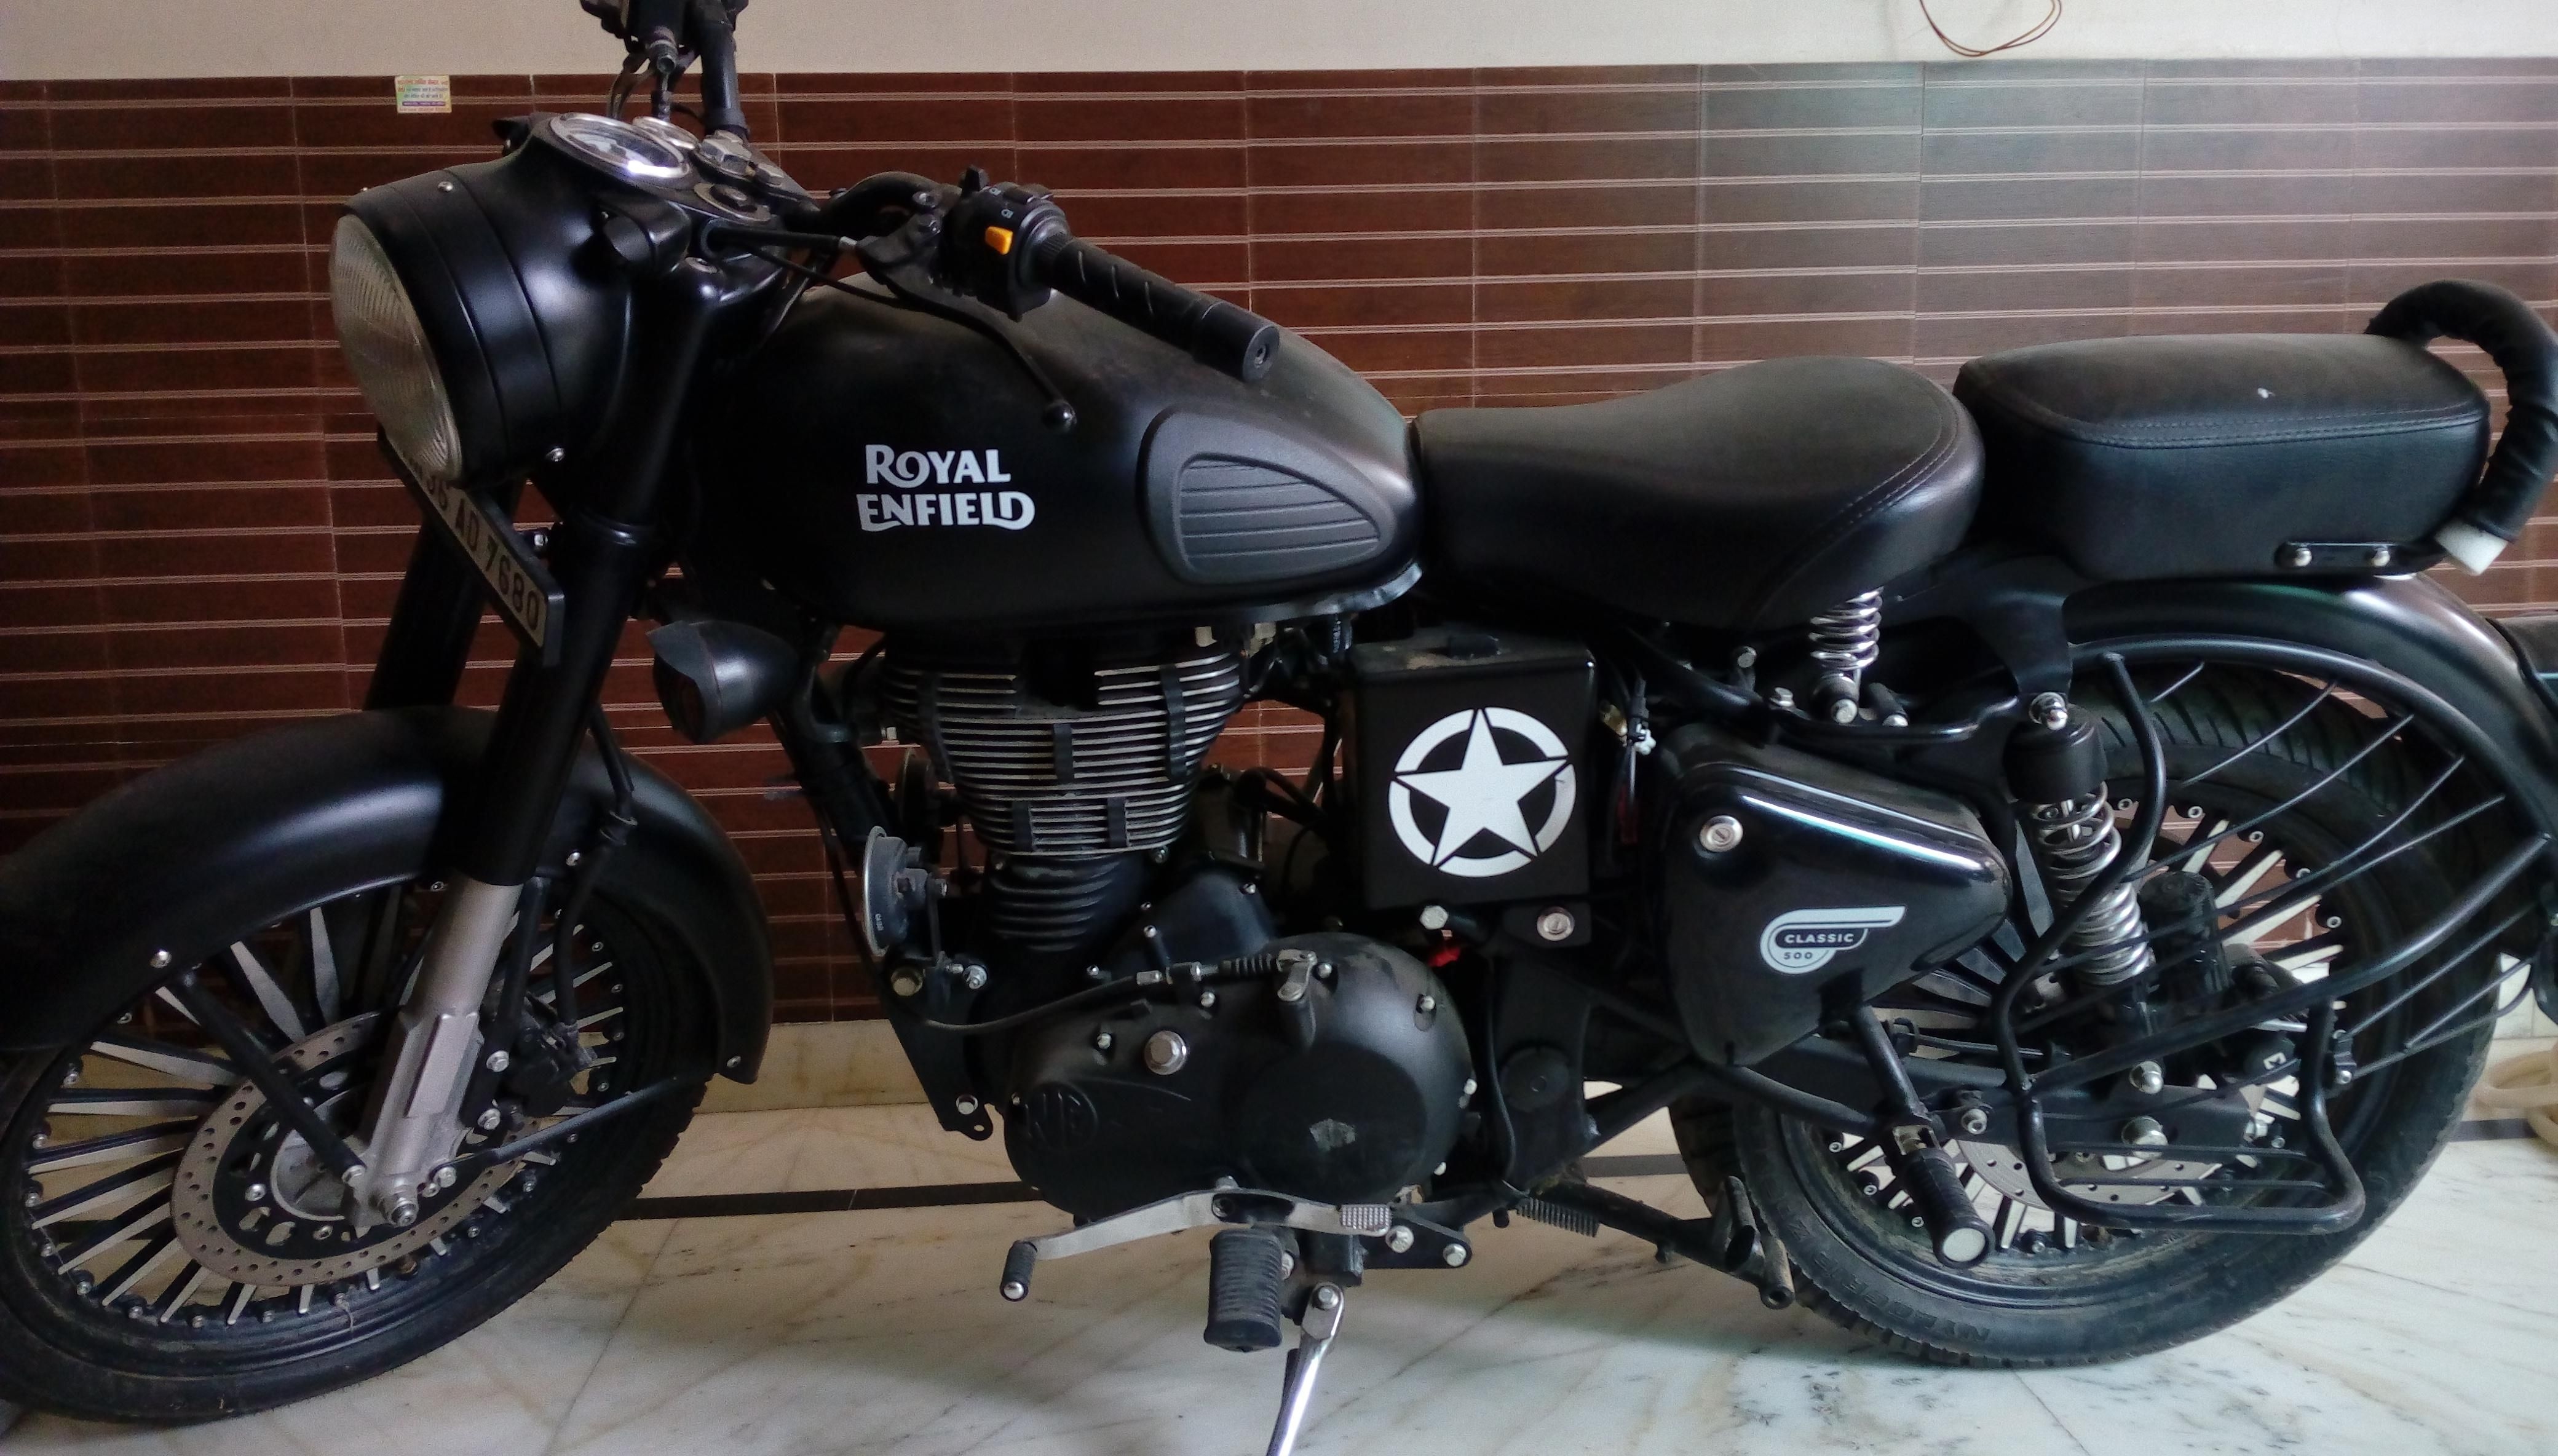  Royal  Enfield  Classic  Stealth Black Bike for Sale in 